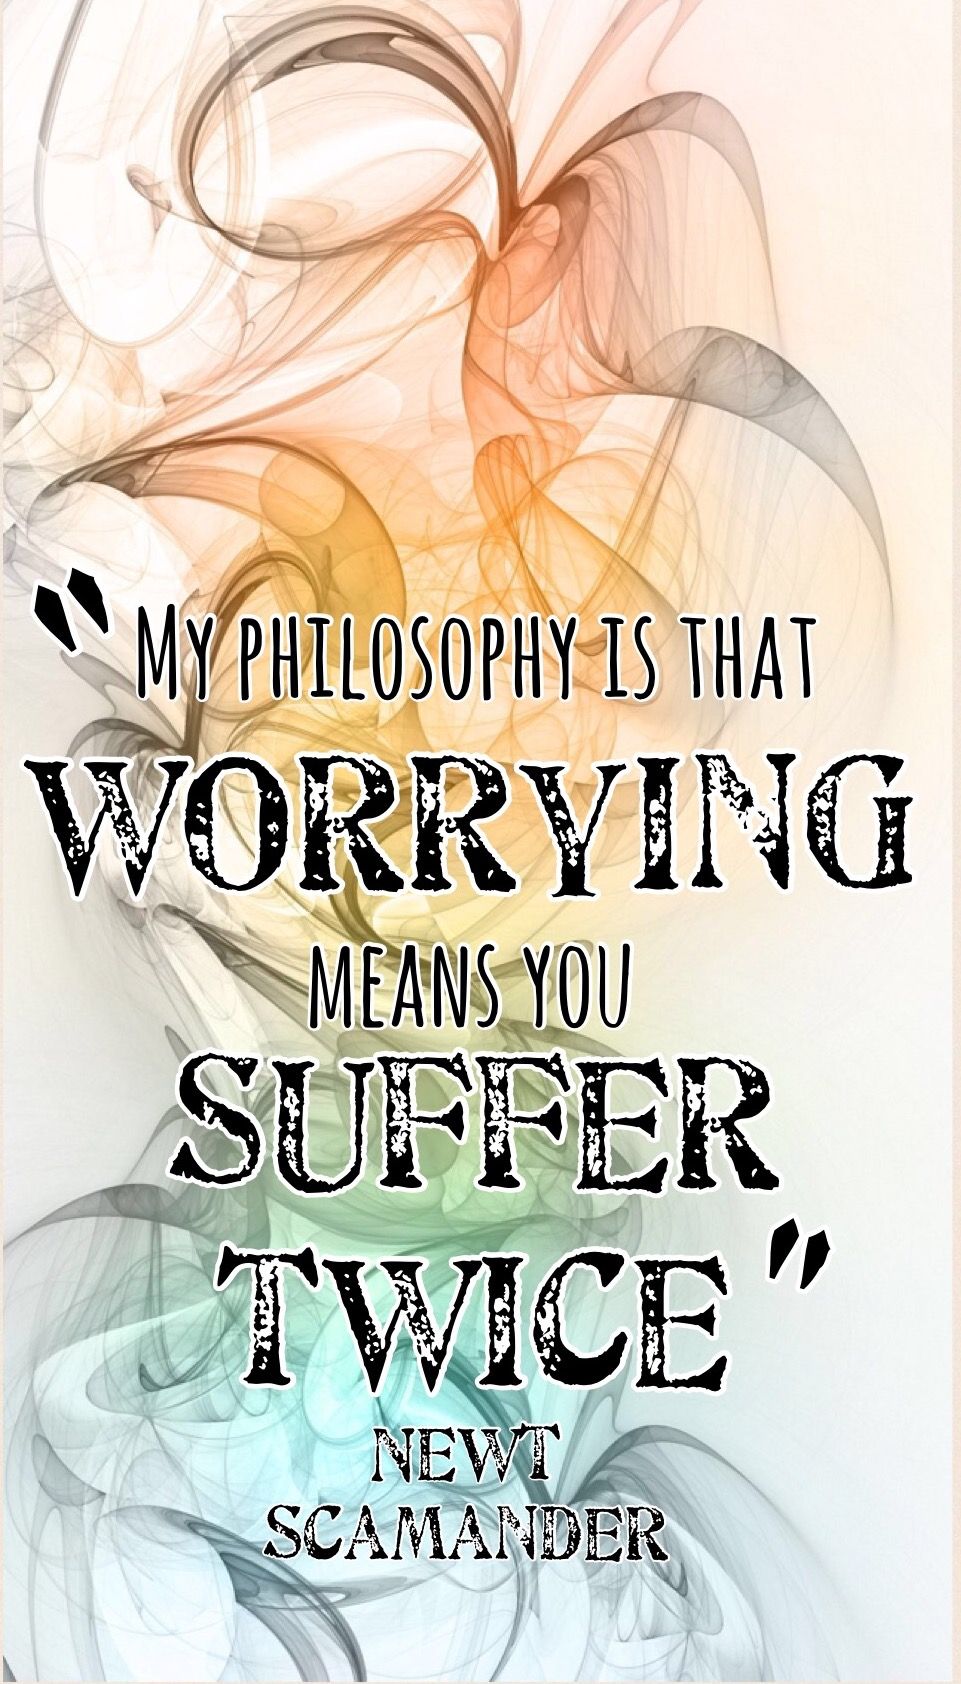 A Newt Quote Phone Wallpaper I Made - Worrying Means You Suffer Twice , HD Wallpaper & Backgrounds